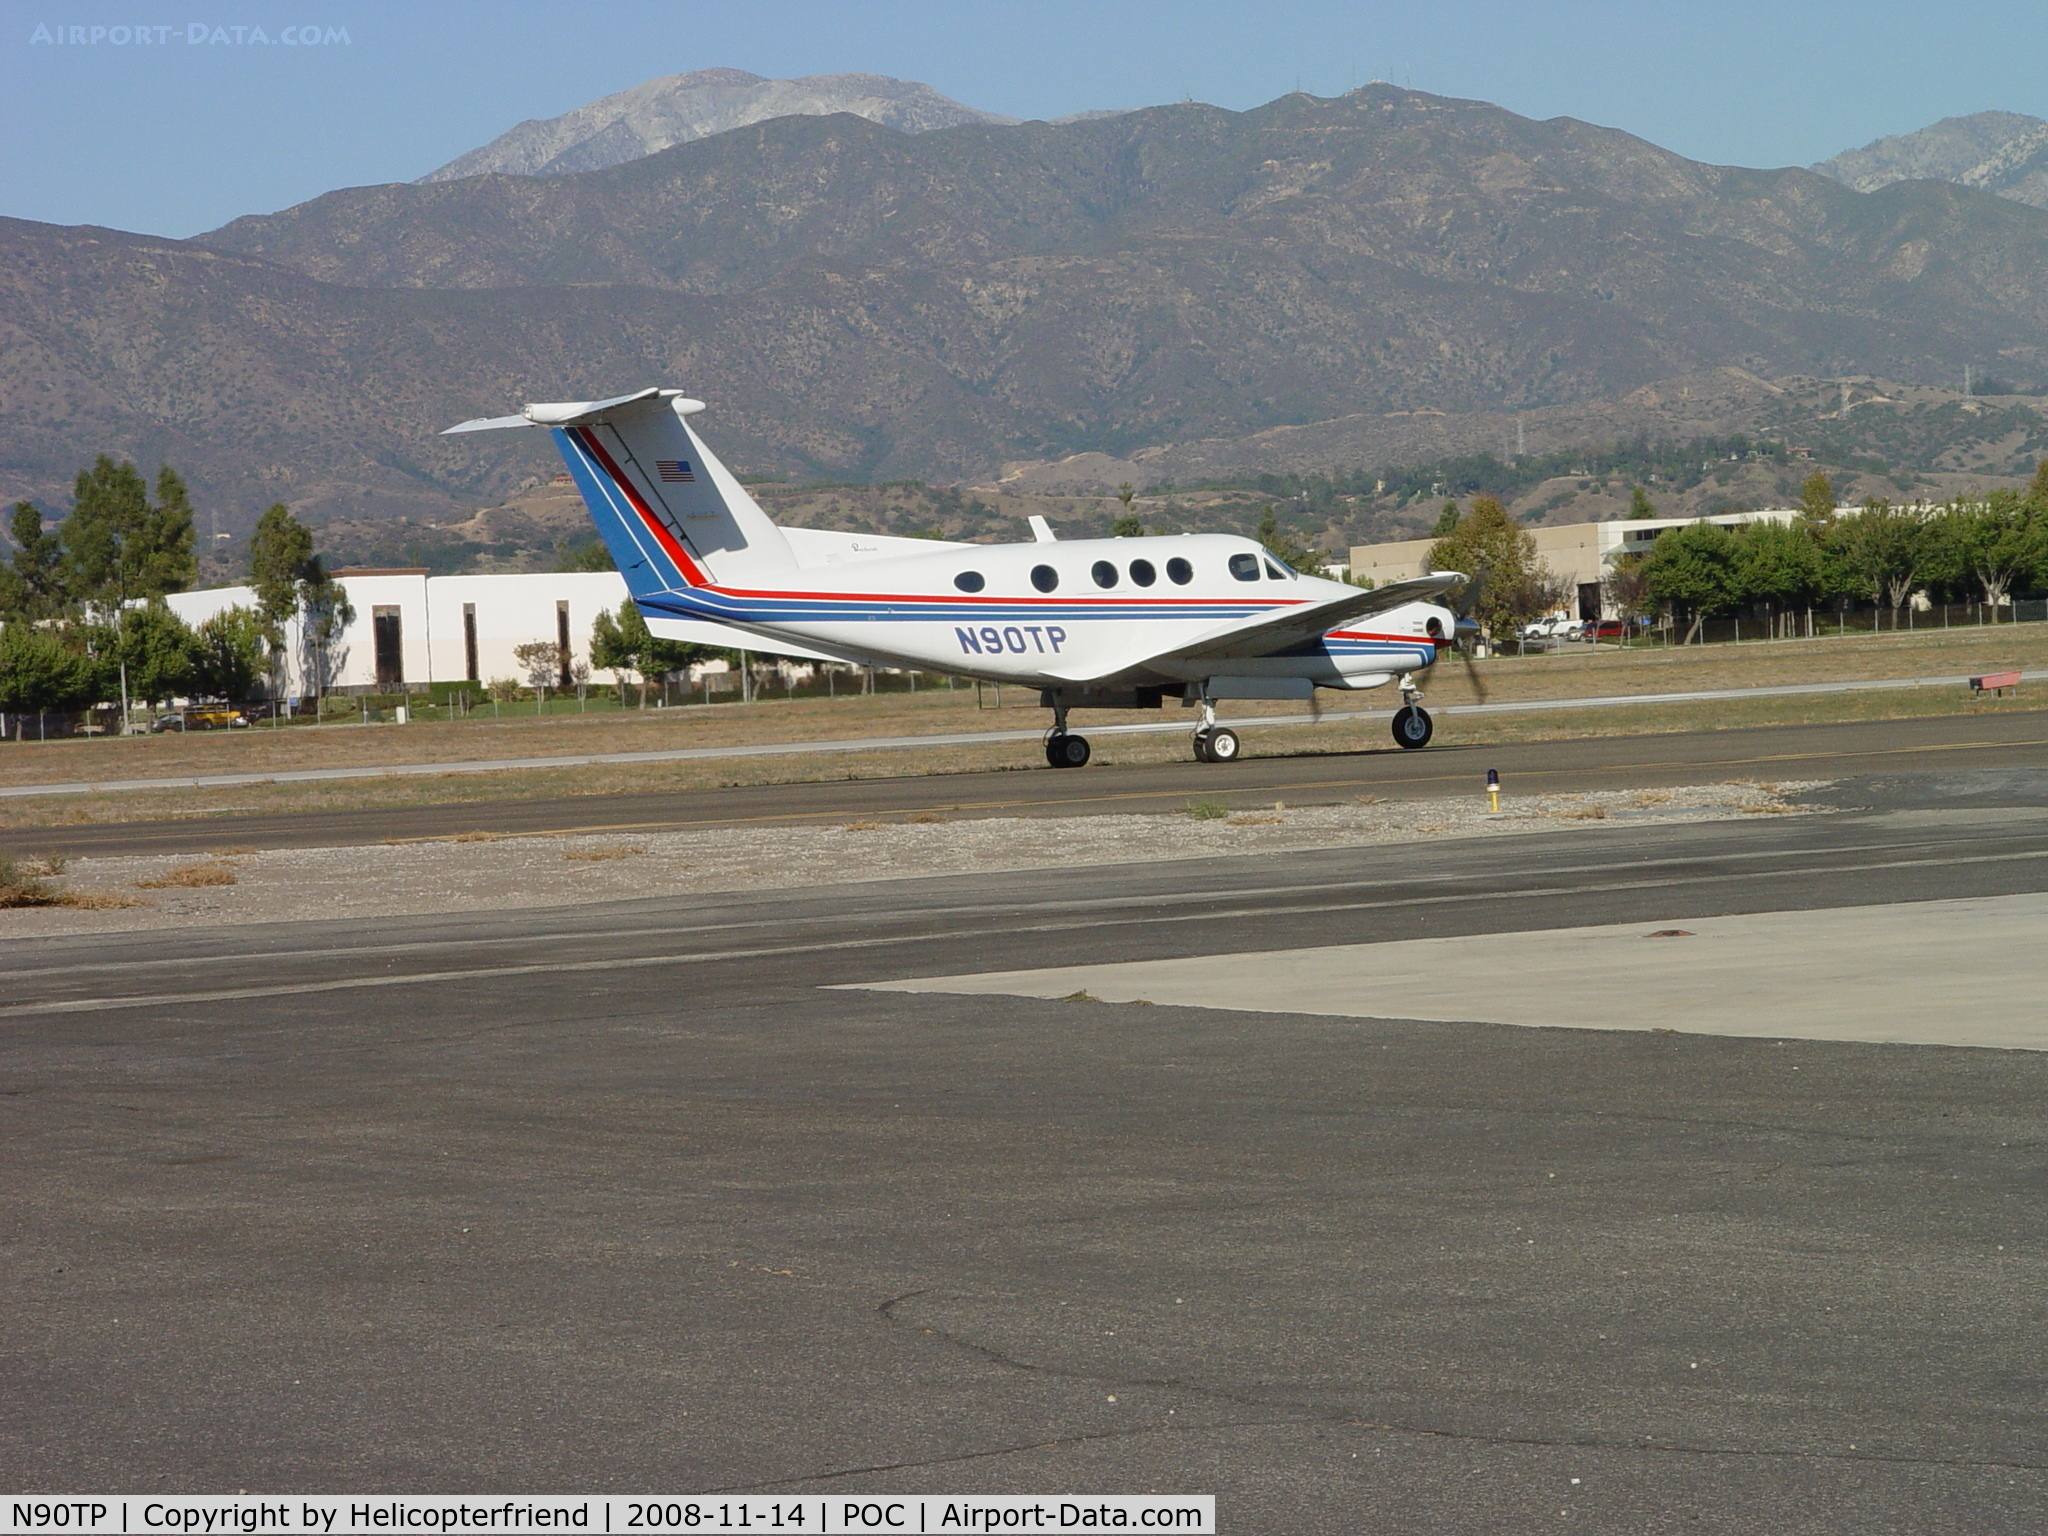 N90TP, 1980 Beech F90 King Air C/N LA-66, Approaching warm-up area before take off